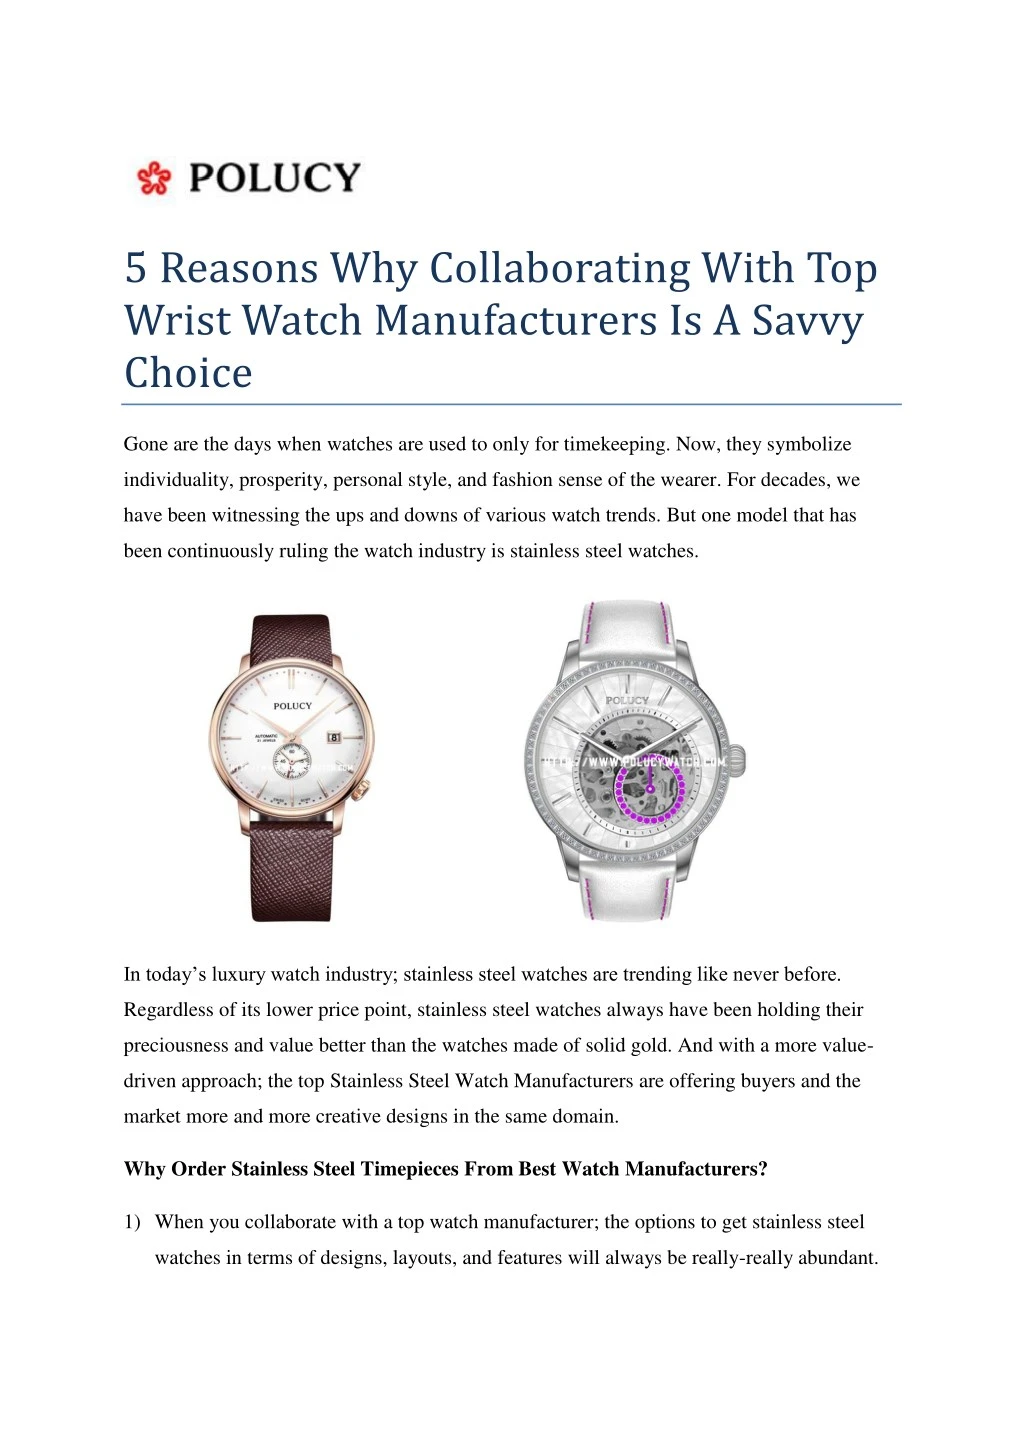 5 reasons why collaborating with top wrist watch